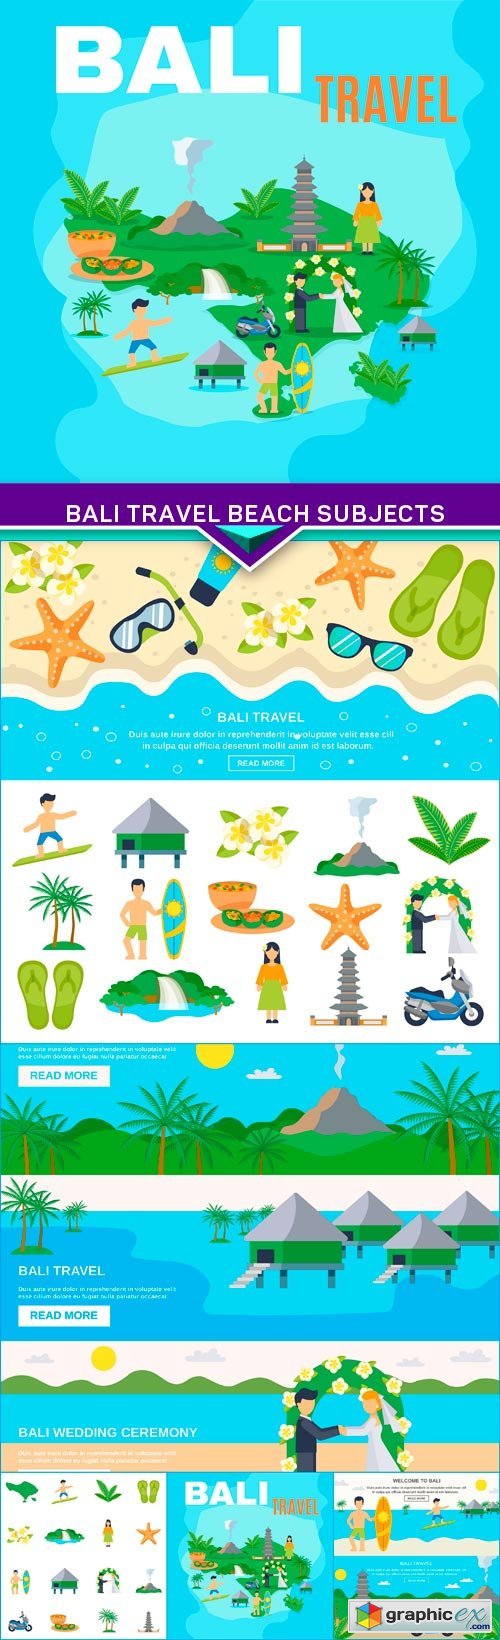 Concept Bali travel beach subjects and tourism goals 5X EPS